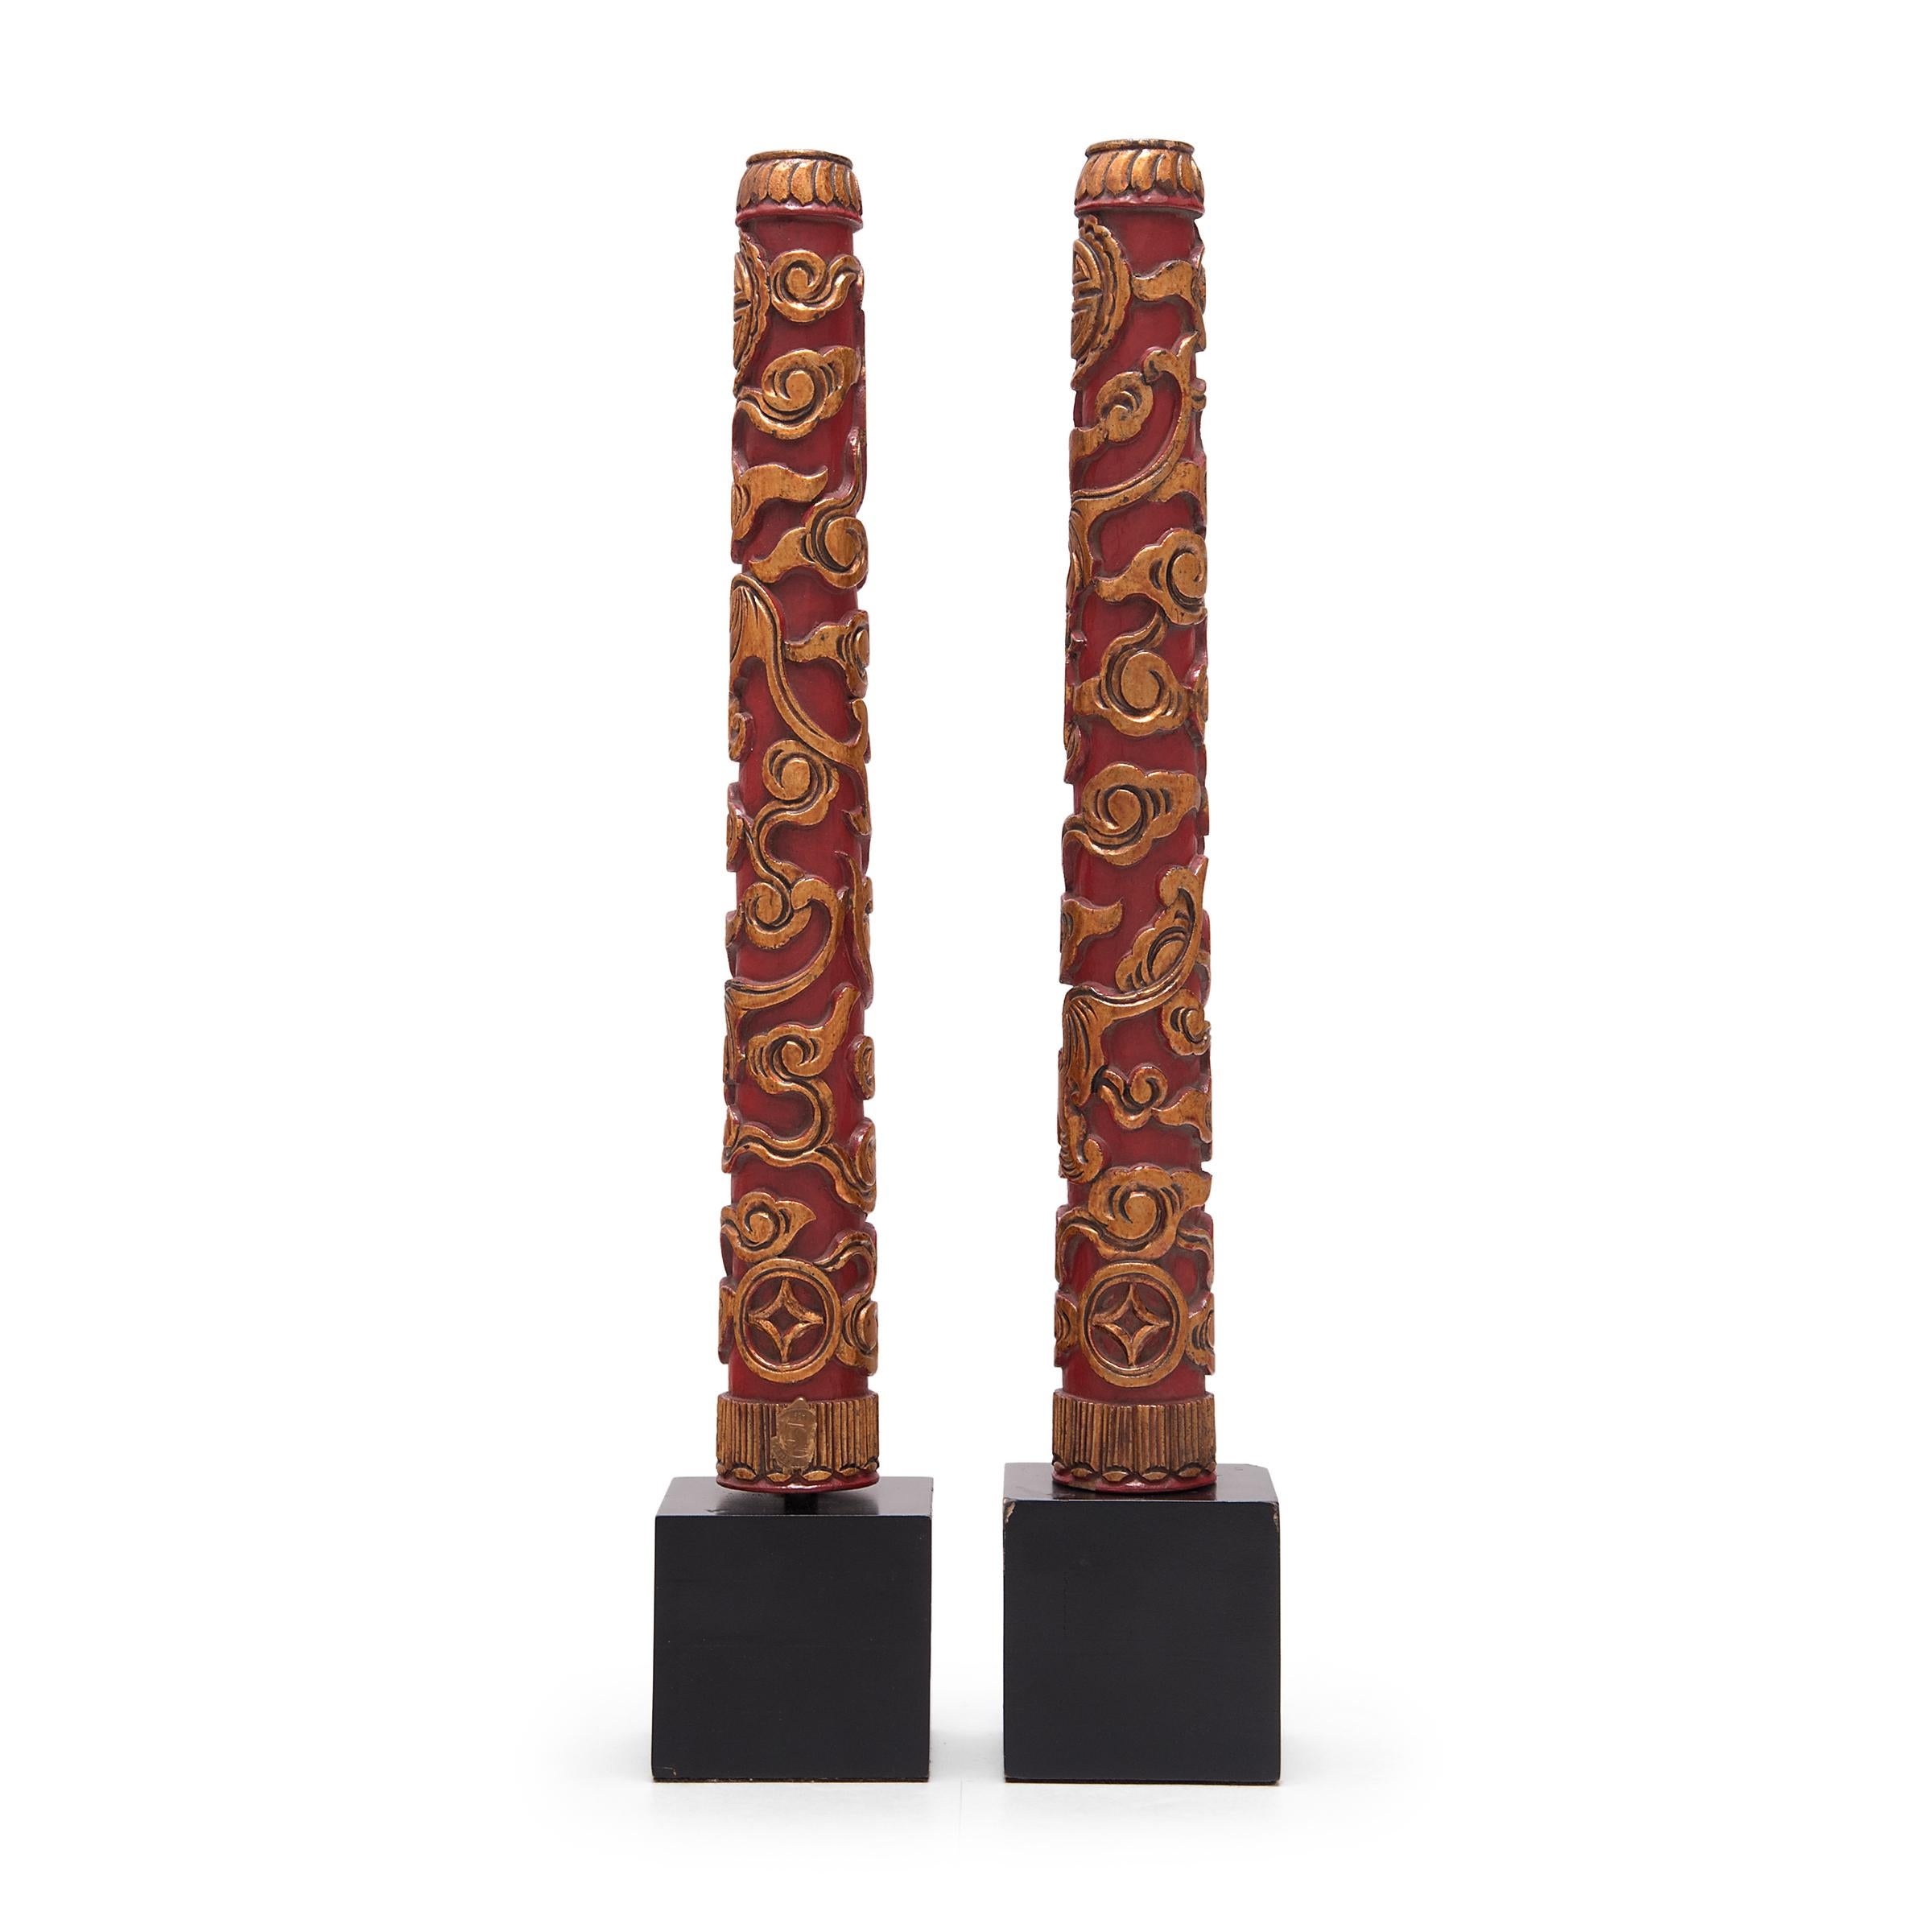 These hand-carved wooden pillars were once used to elevate burning incense in a shrine or altar display. An essential element of ritual prayer, incense is burned as a form of offering and to measure the duration of the ritual process.

These incense